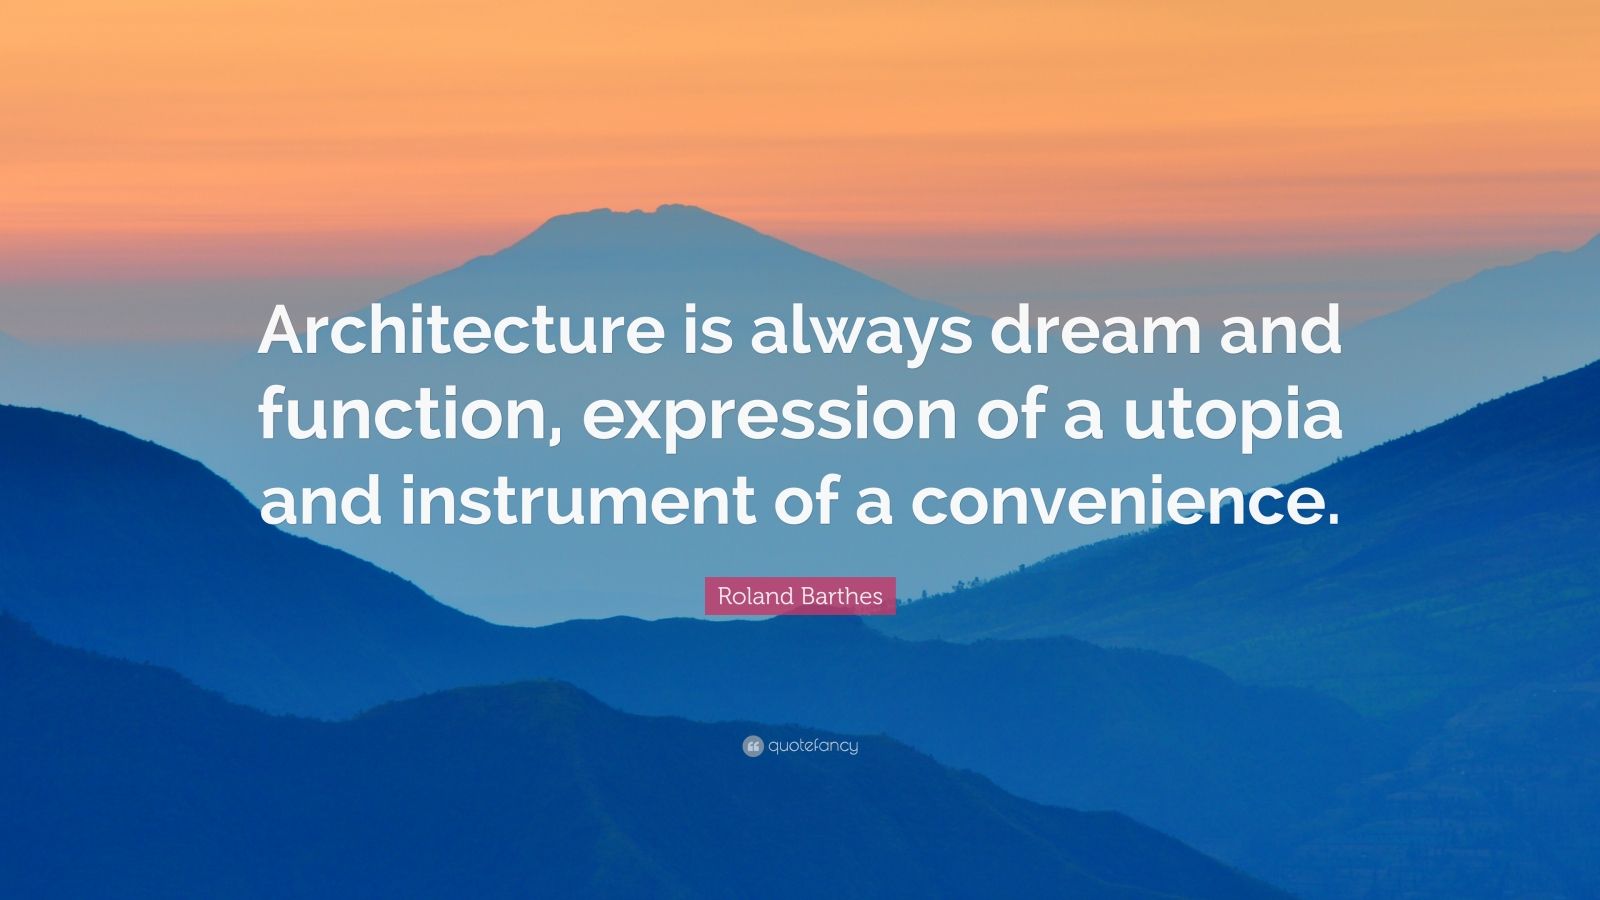 Roland Barthes Quote: “Architecture is always dream and function ...